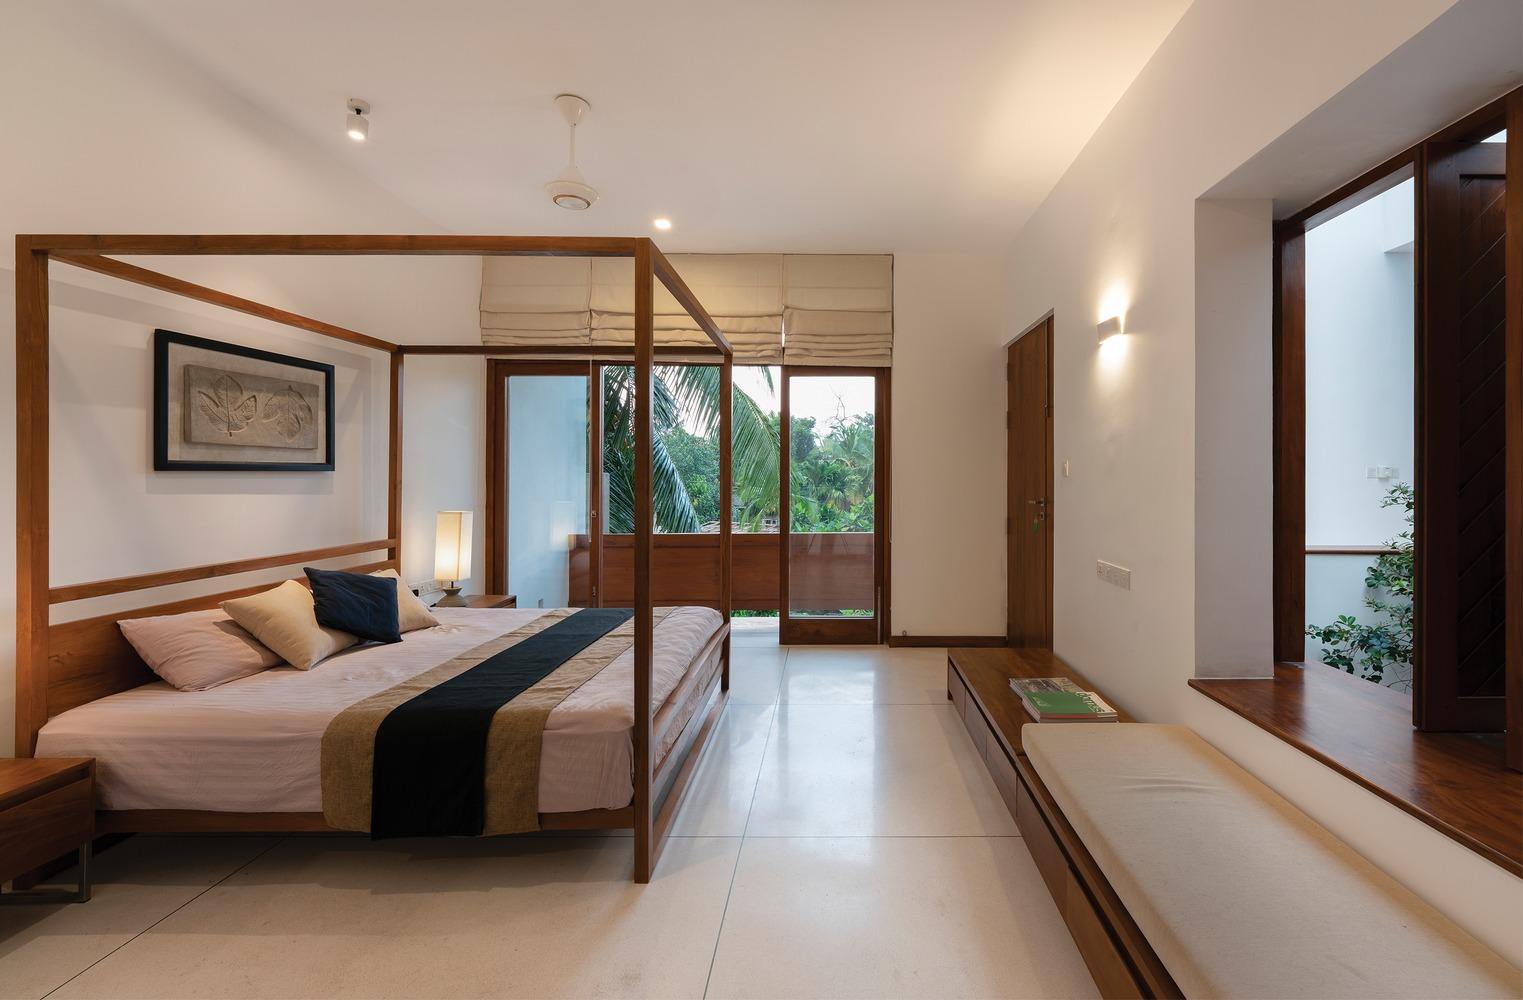 A Sprawling Newlywed Residence for a Young Sri Lankan Couple